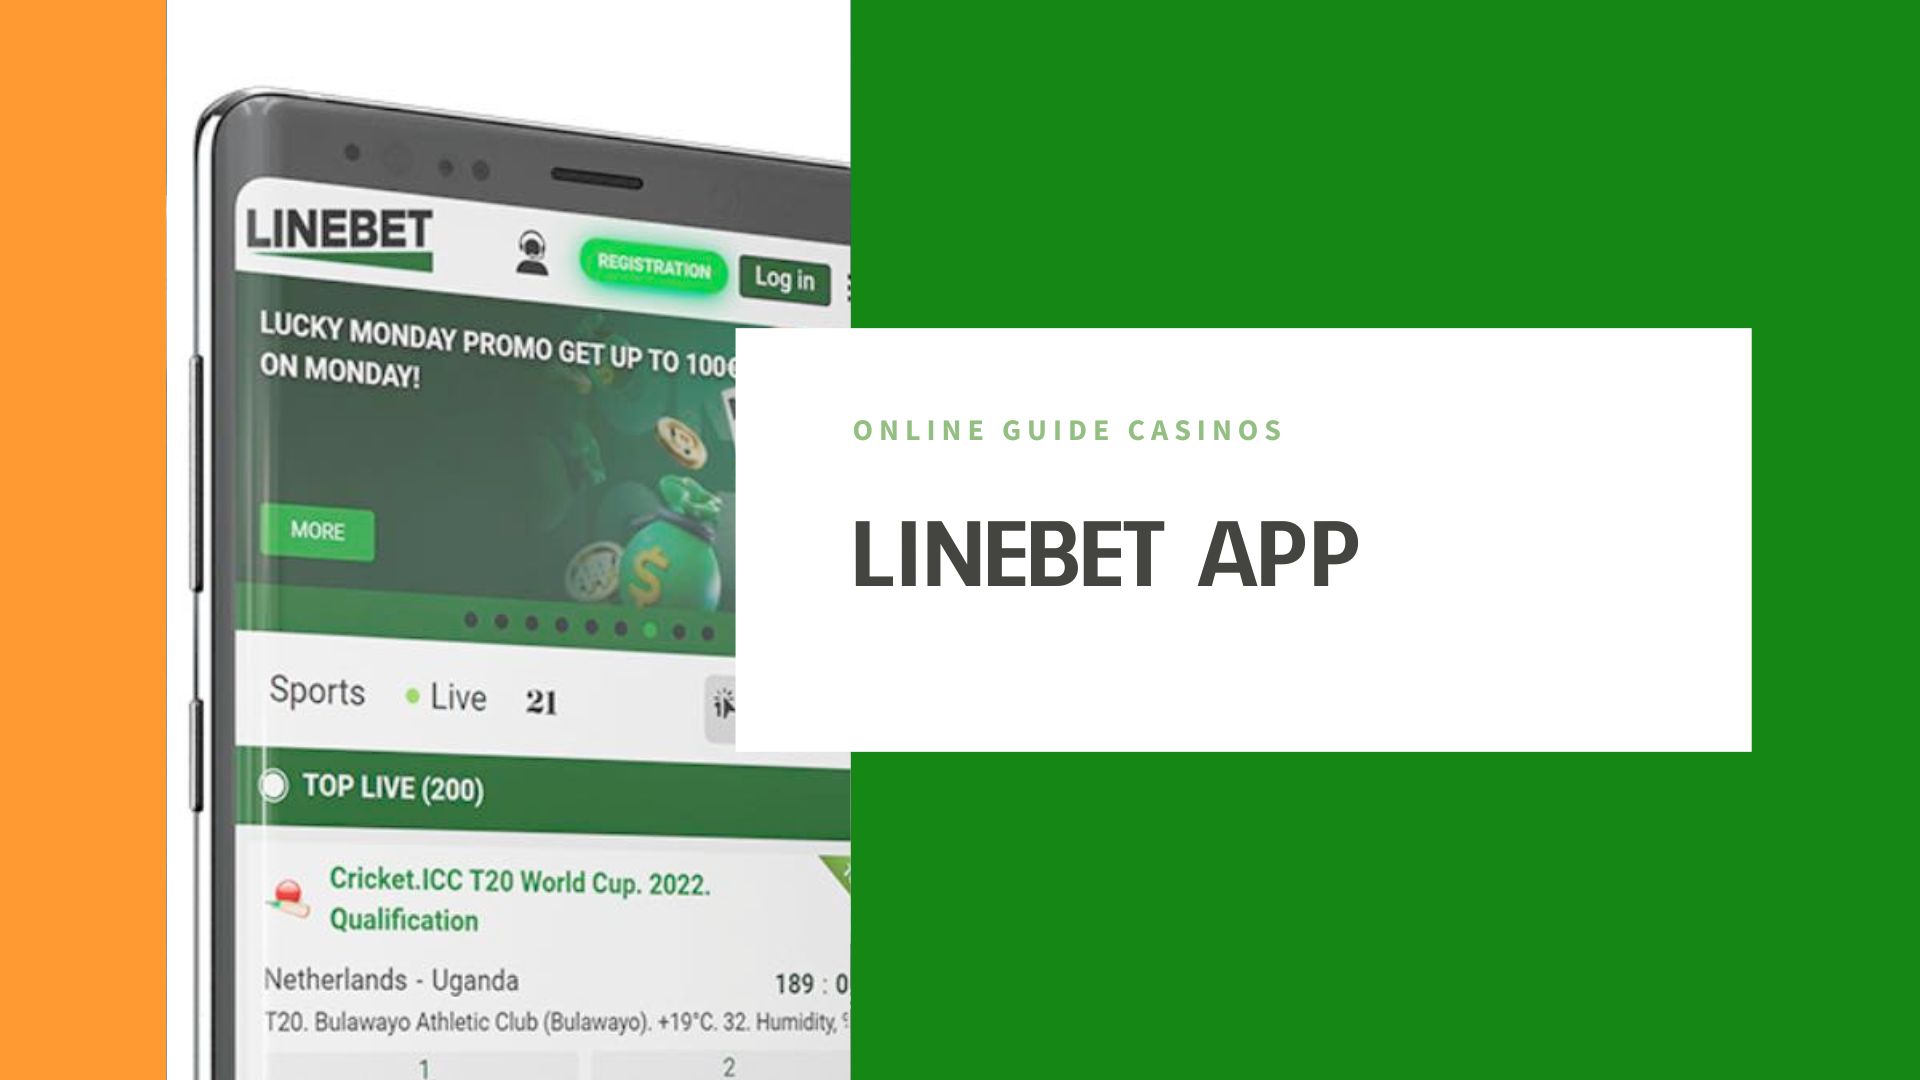 Linebet App - All About Powerful Betting and Gambling Tool for Indians